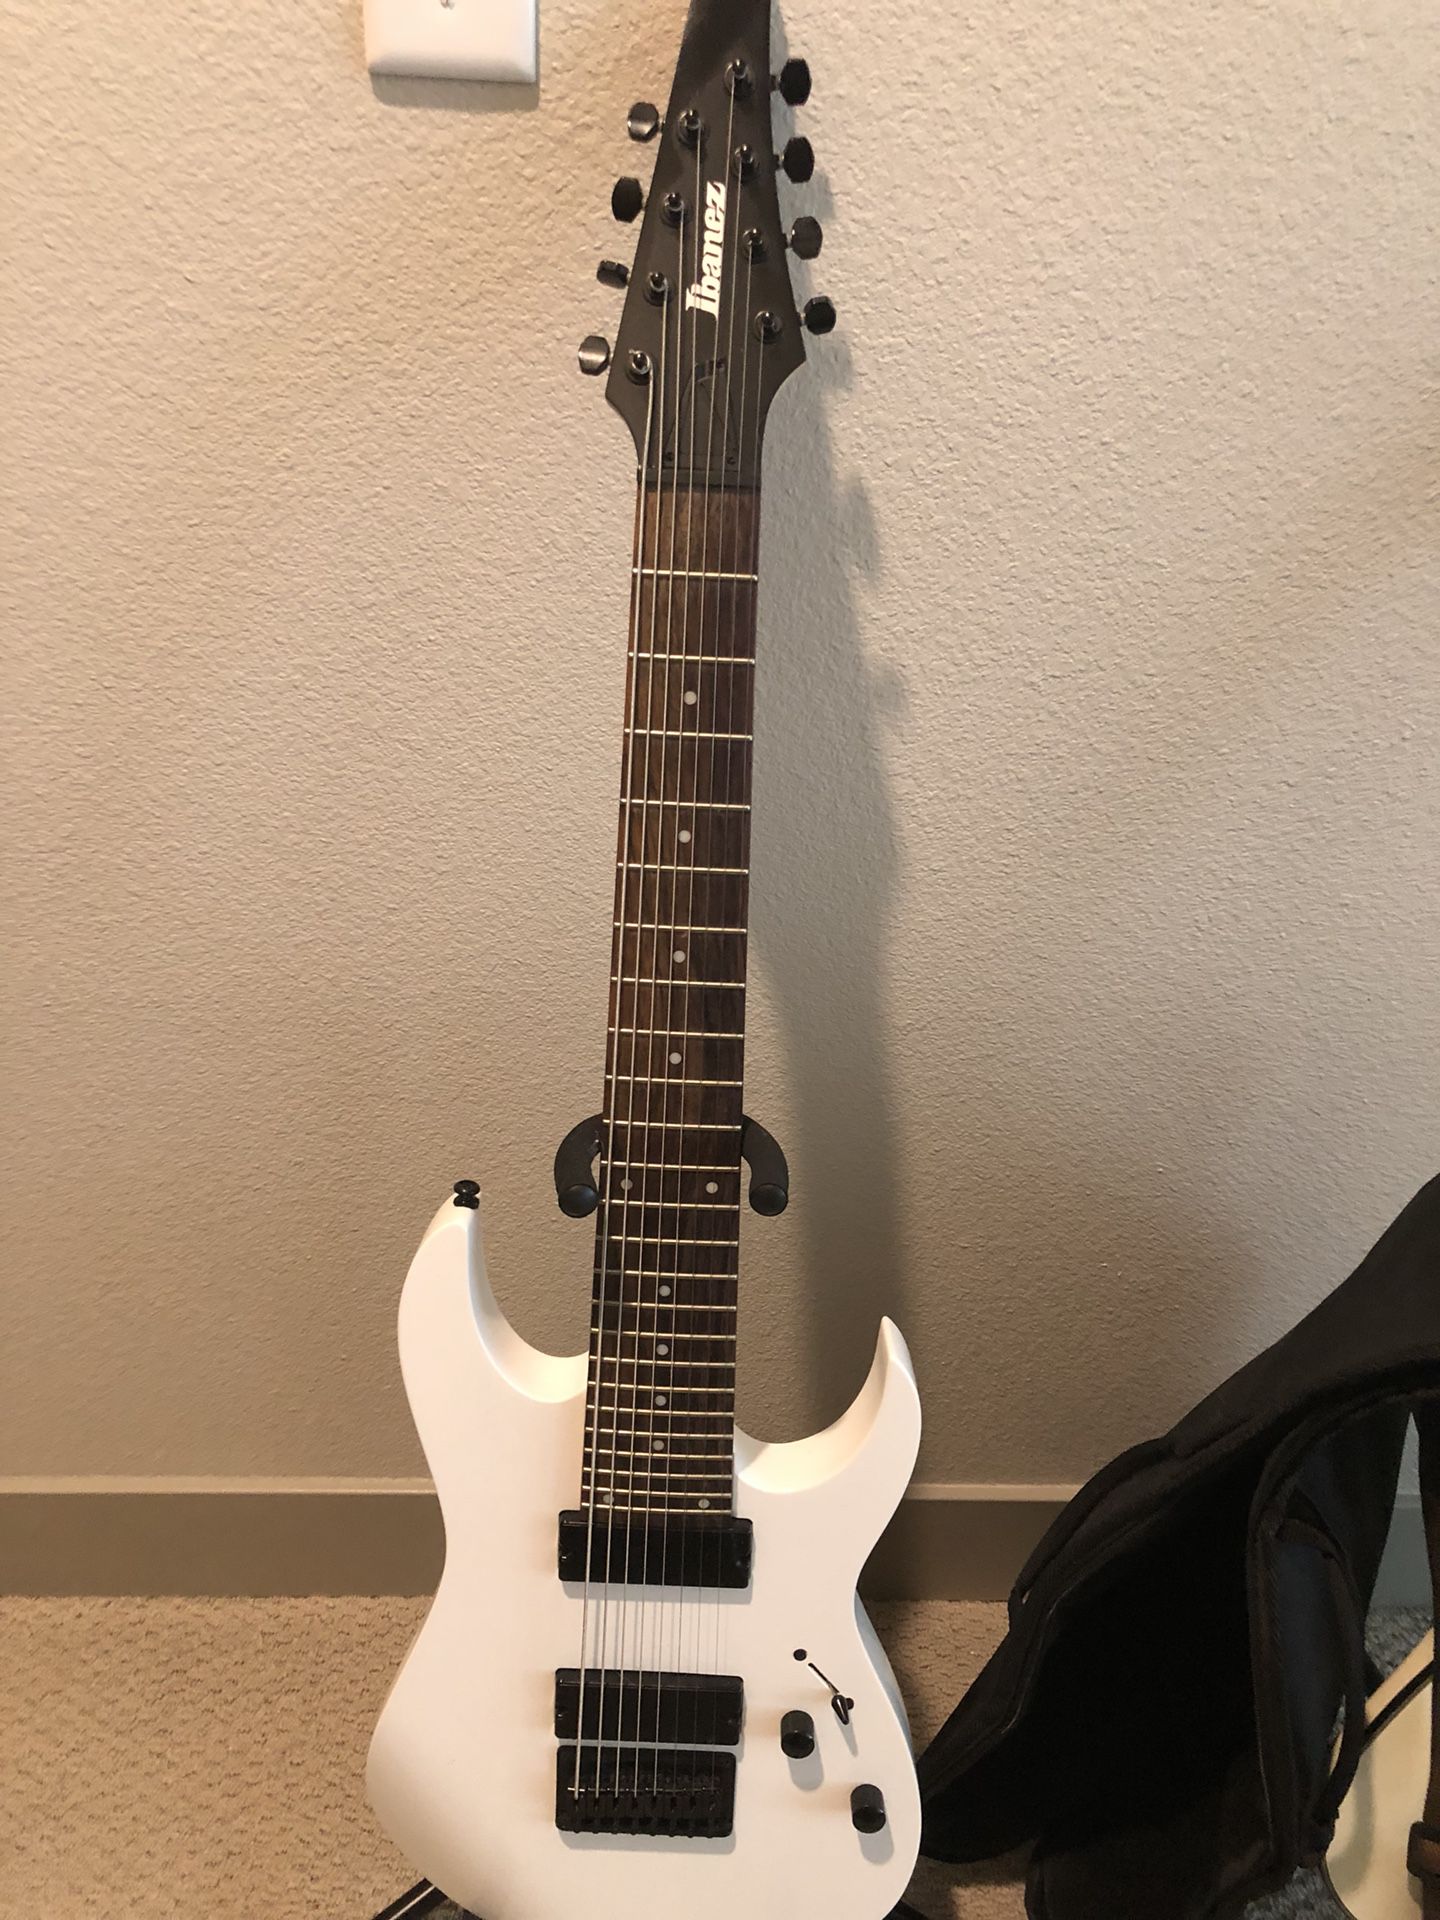 White Ibanez 8-string electric guitar